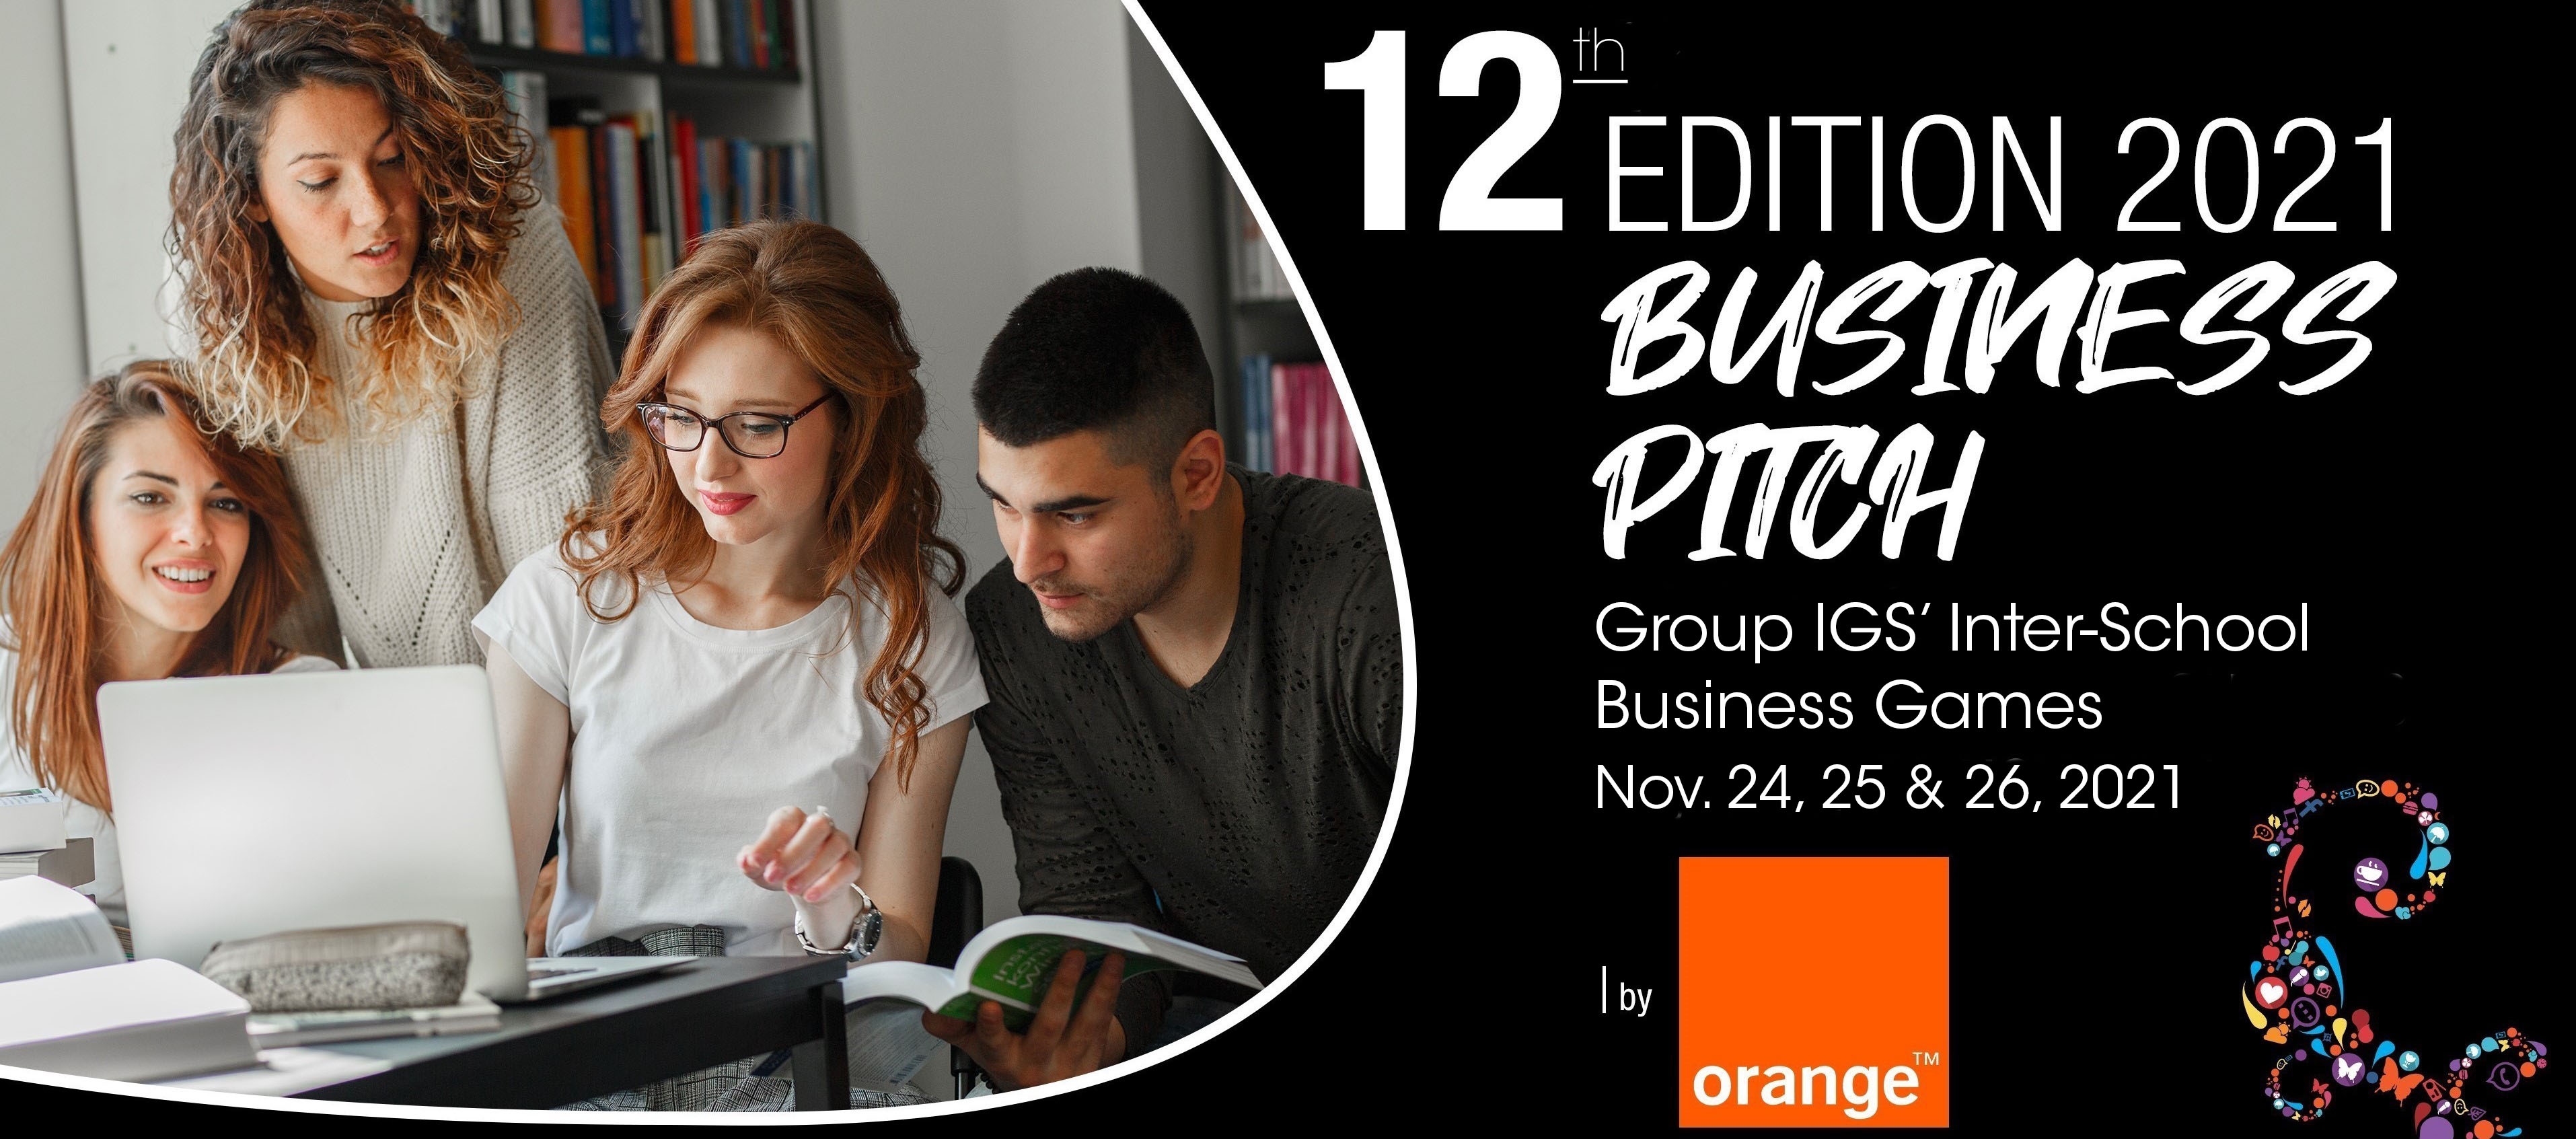 12th edition of the Business Games - Orange